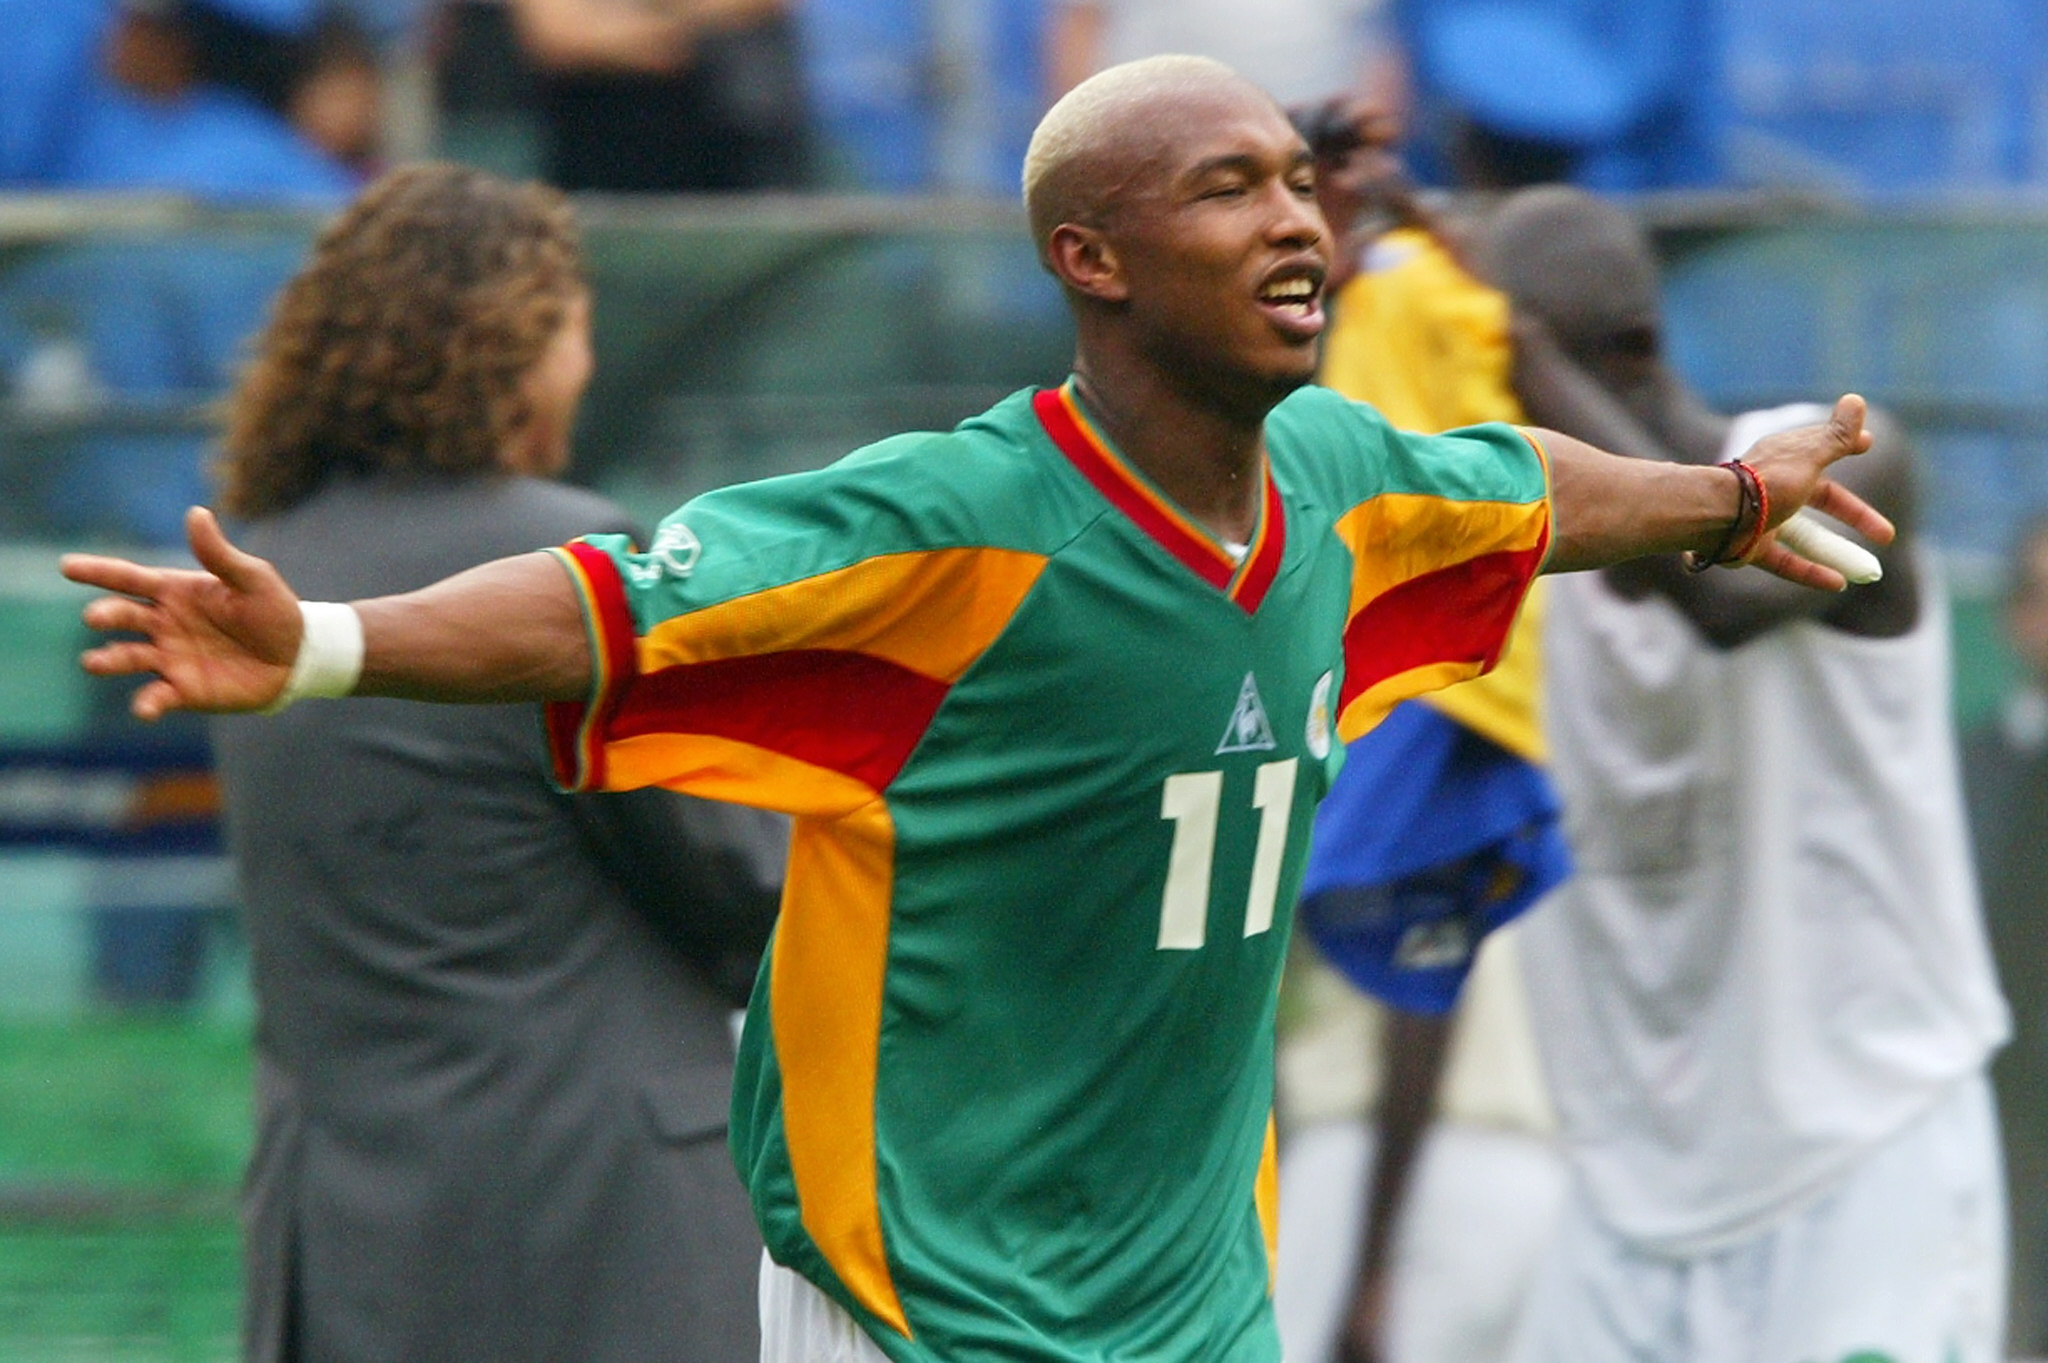 El Hadji Diouf is among ambassadors in Moscow supporting Morocco's bid to host the 2026 FIFA World Cup ©Getty Images